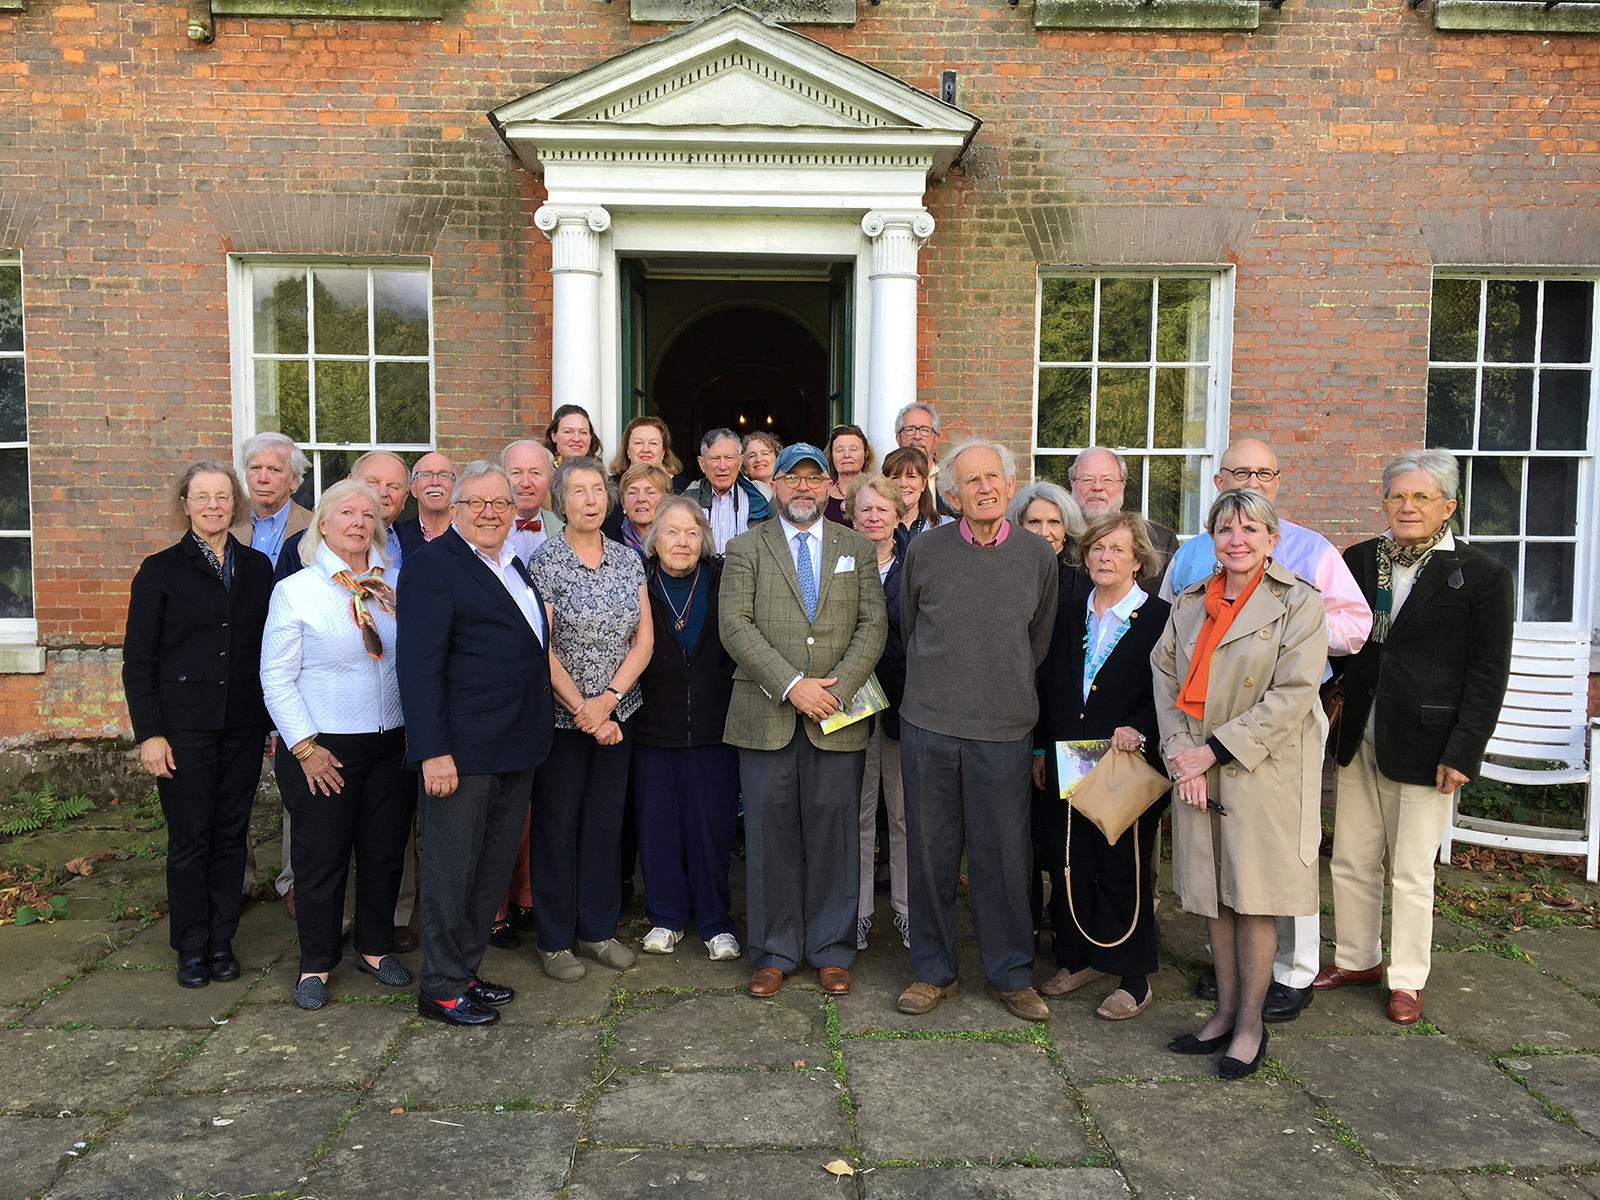 Sir Simon and Lady Bowes-Lyon at St Pauls Walden Bury, Hertfordshire, birthplace of The Queen Mother, with Brenton Simons and patrons of American Ancestors / New England Historic Genealogical Society in 2016.